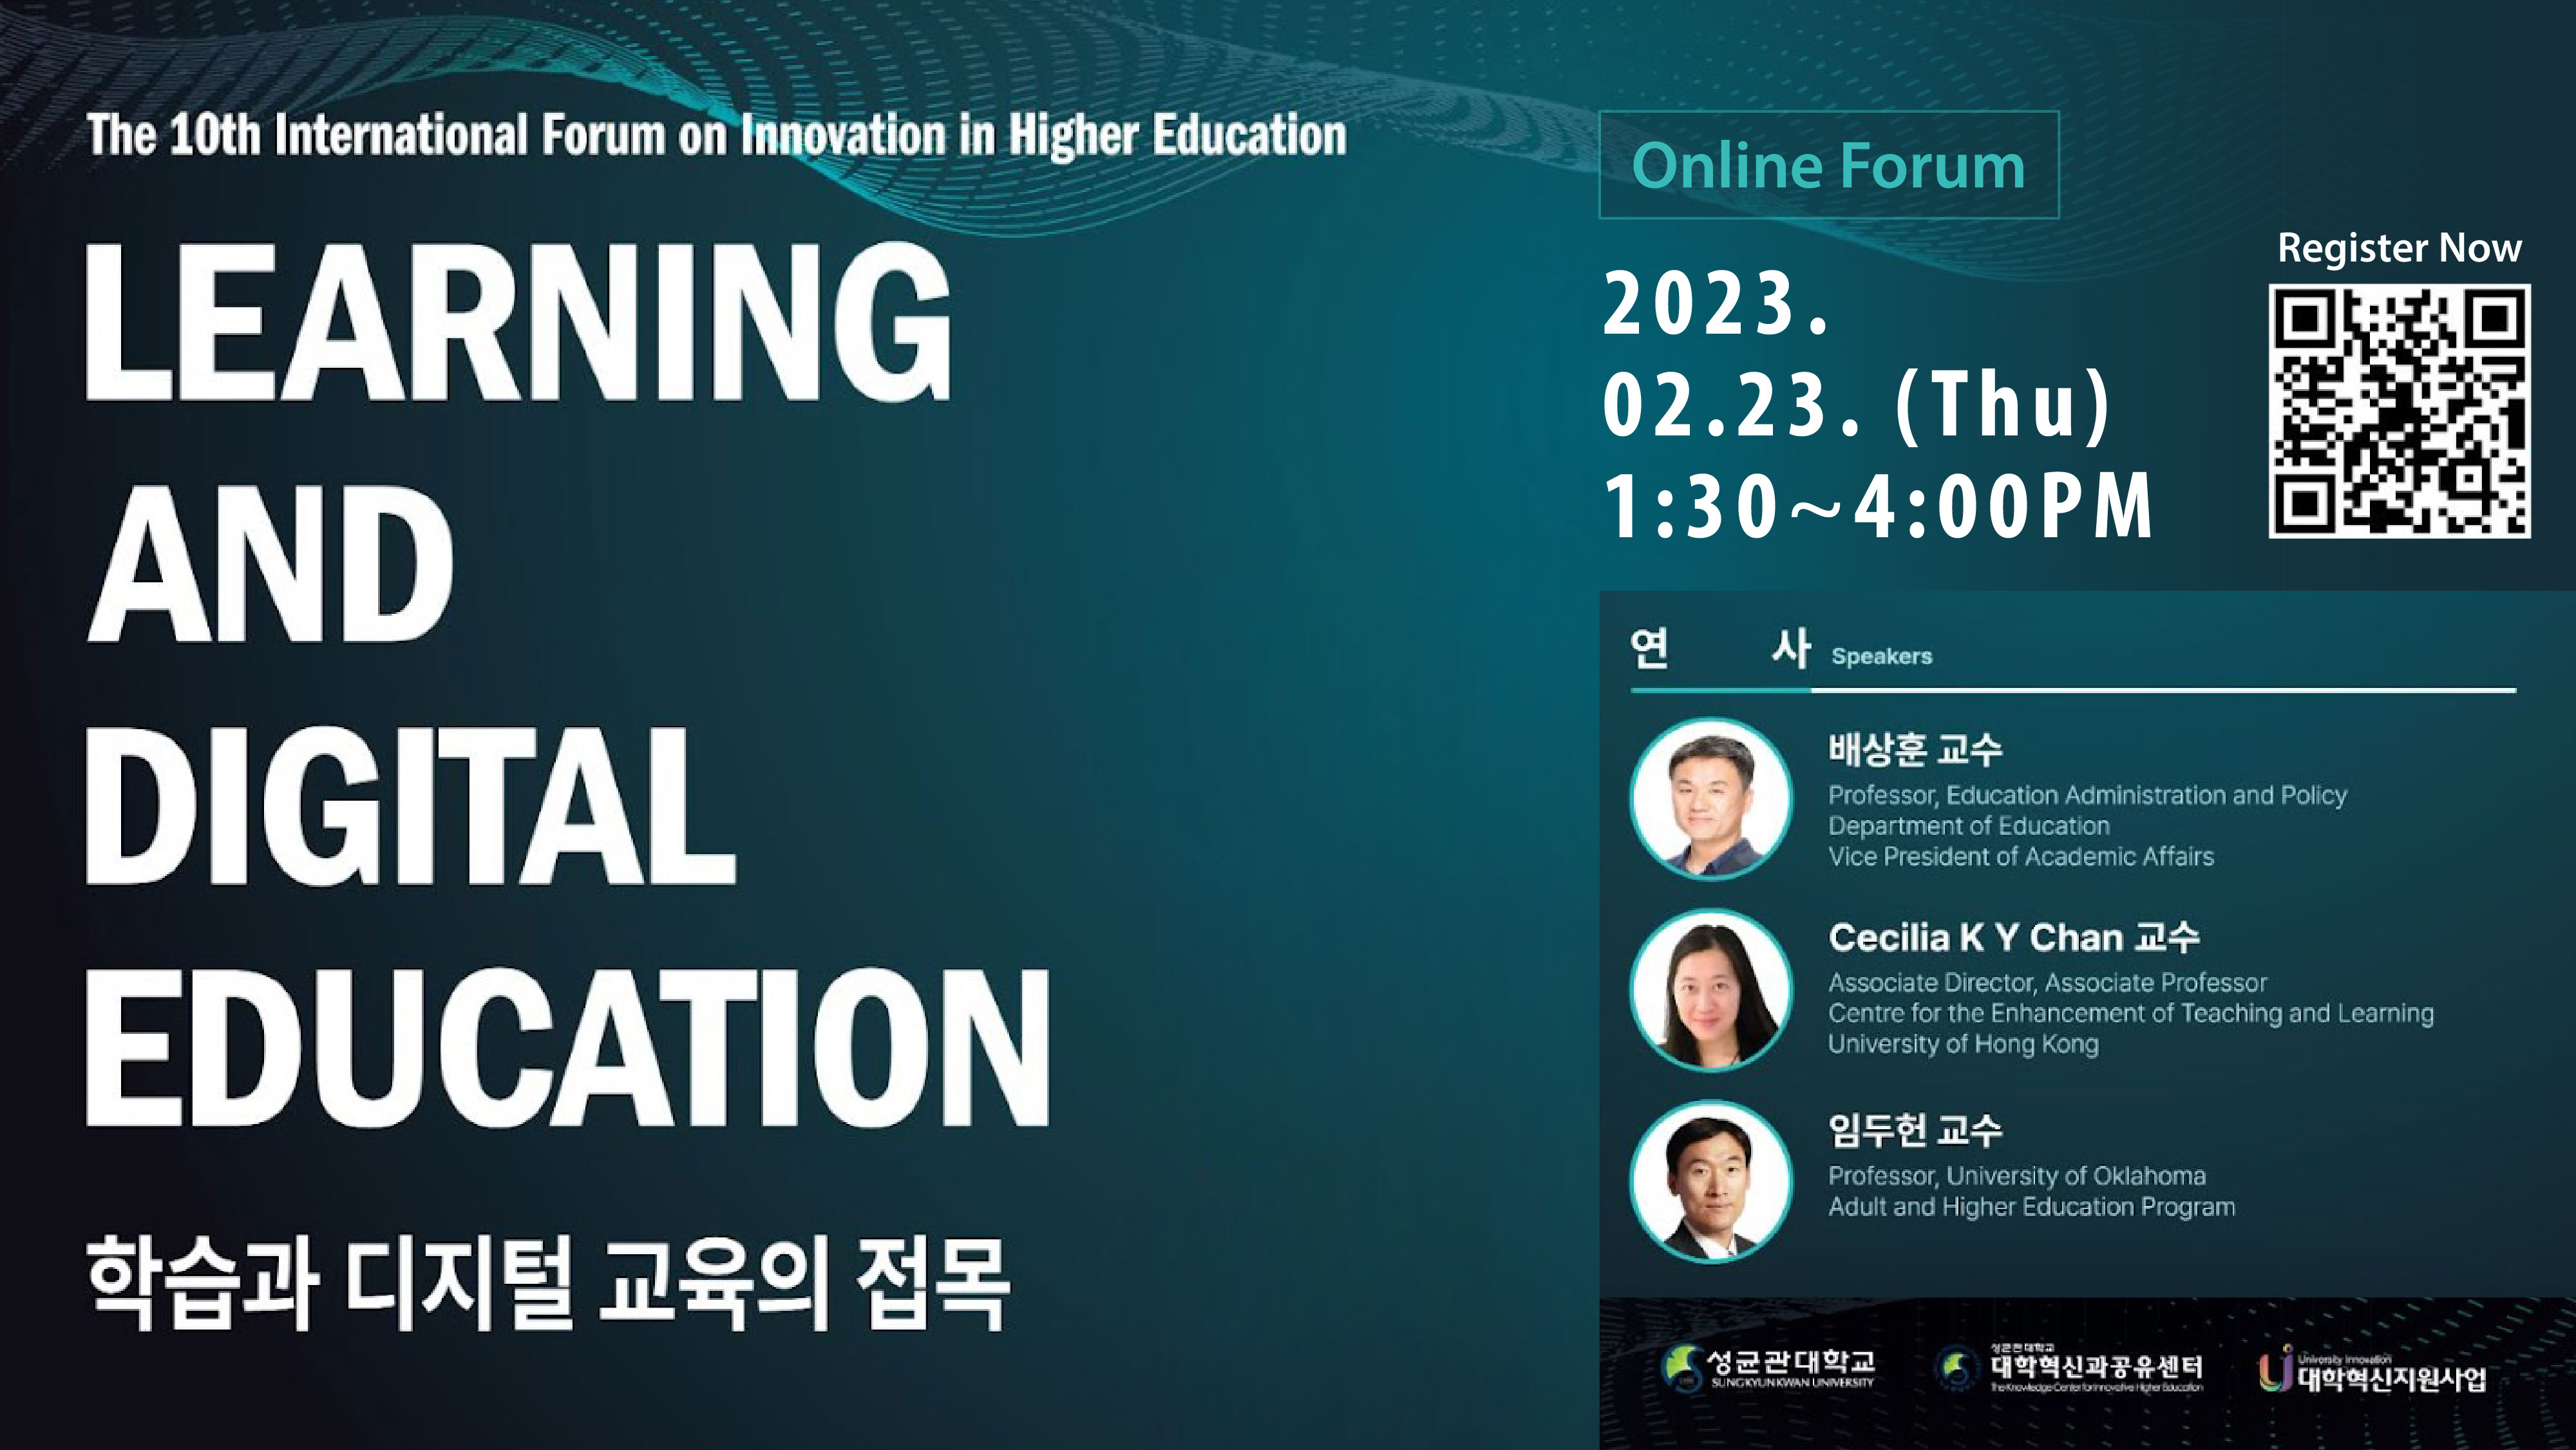 The 10th International Forum on Innovation in Higher Education: Learning and Digital Education